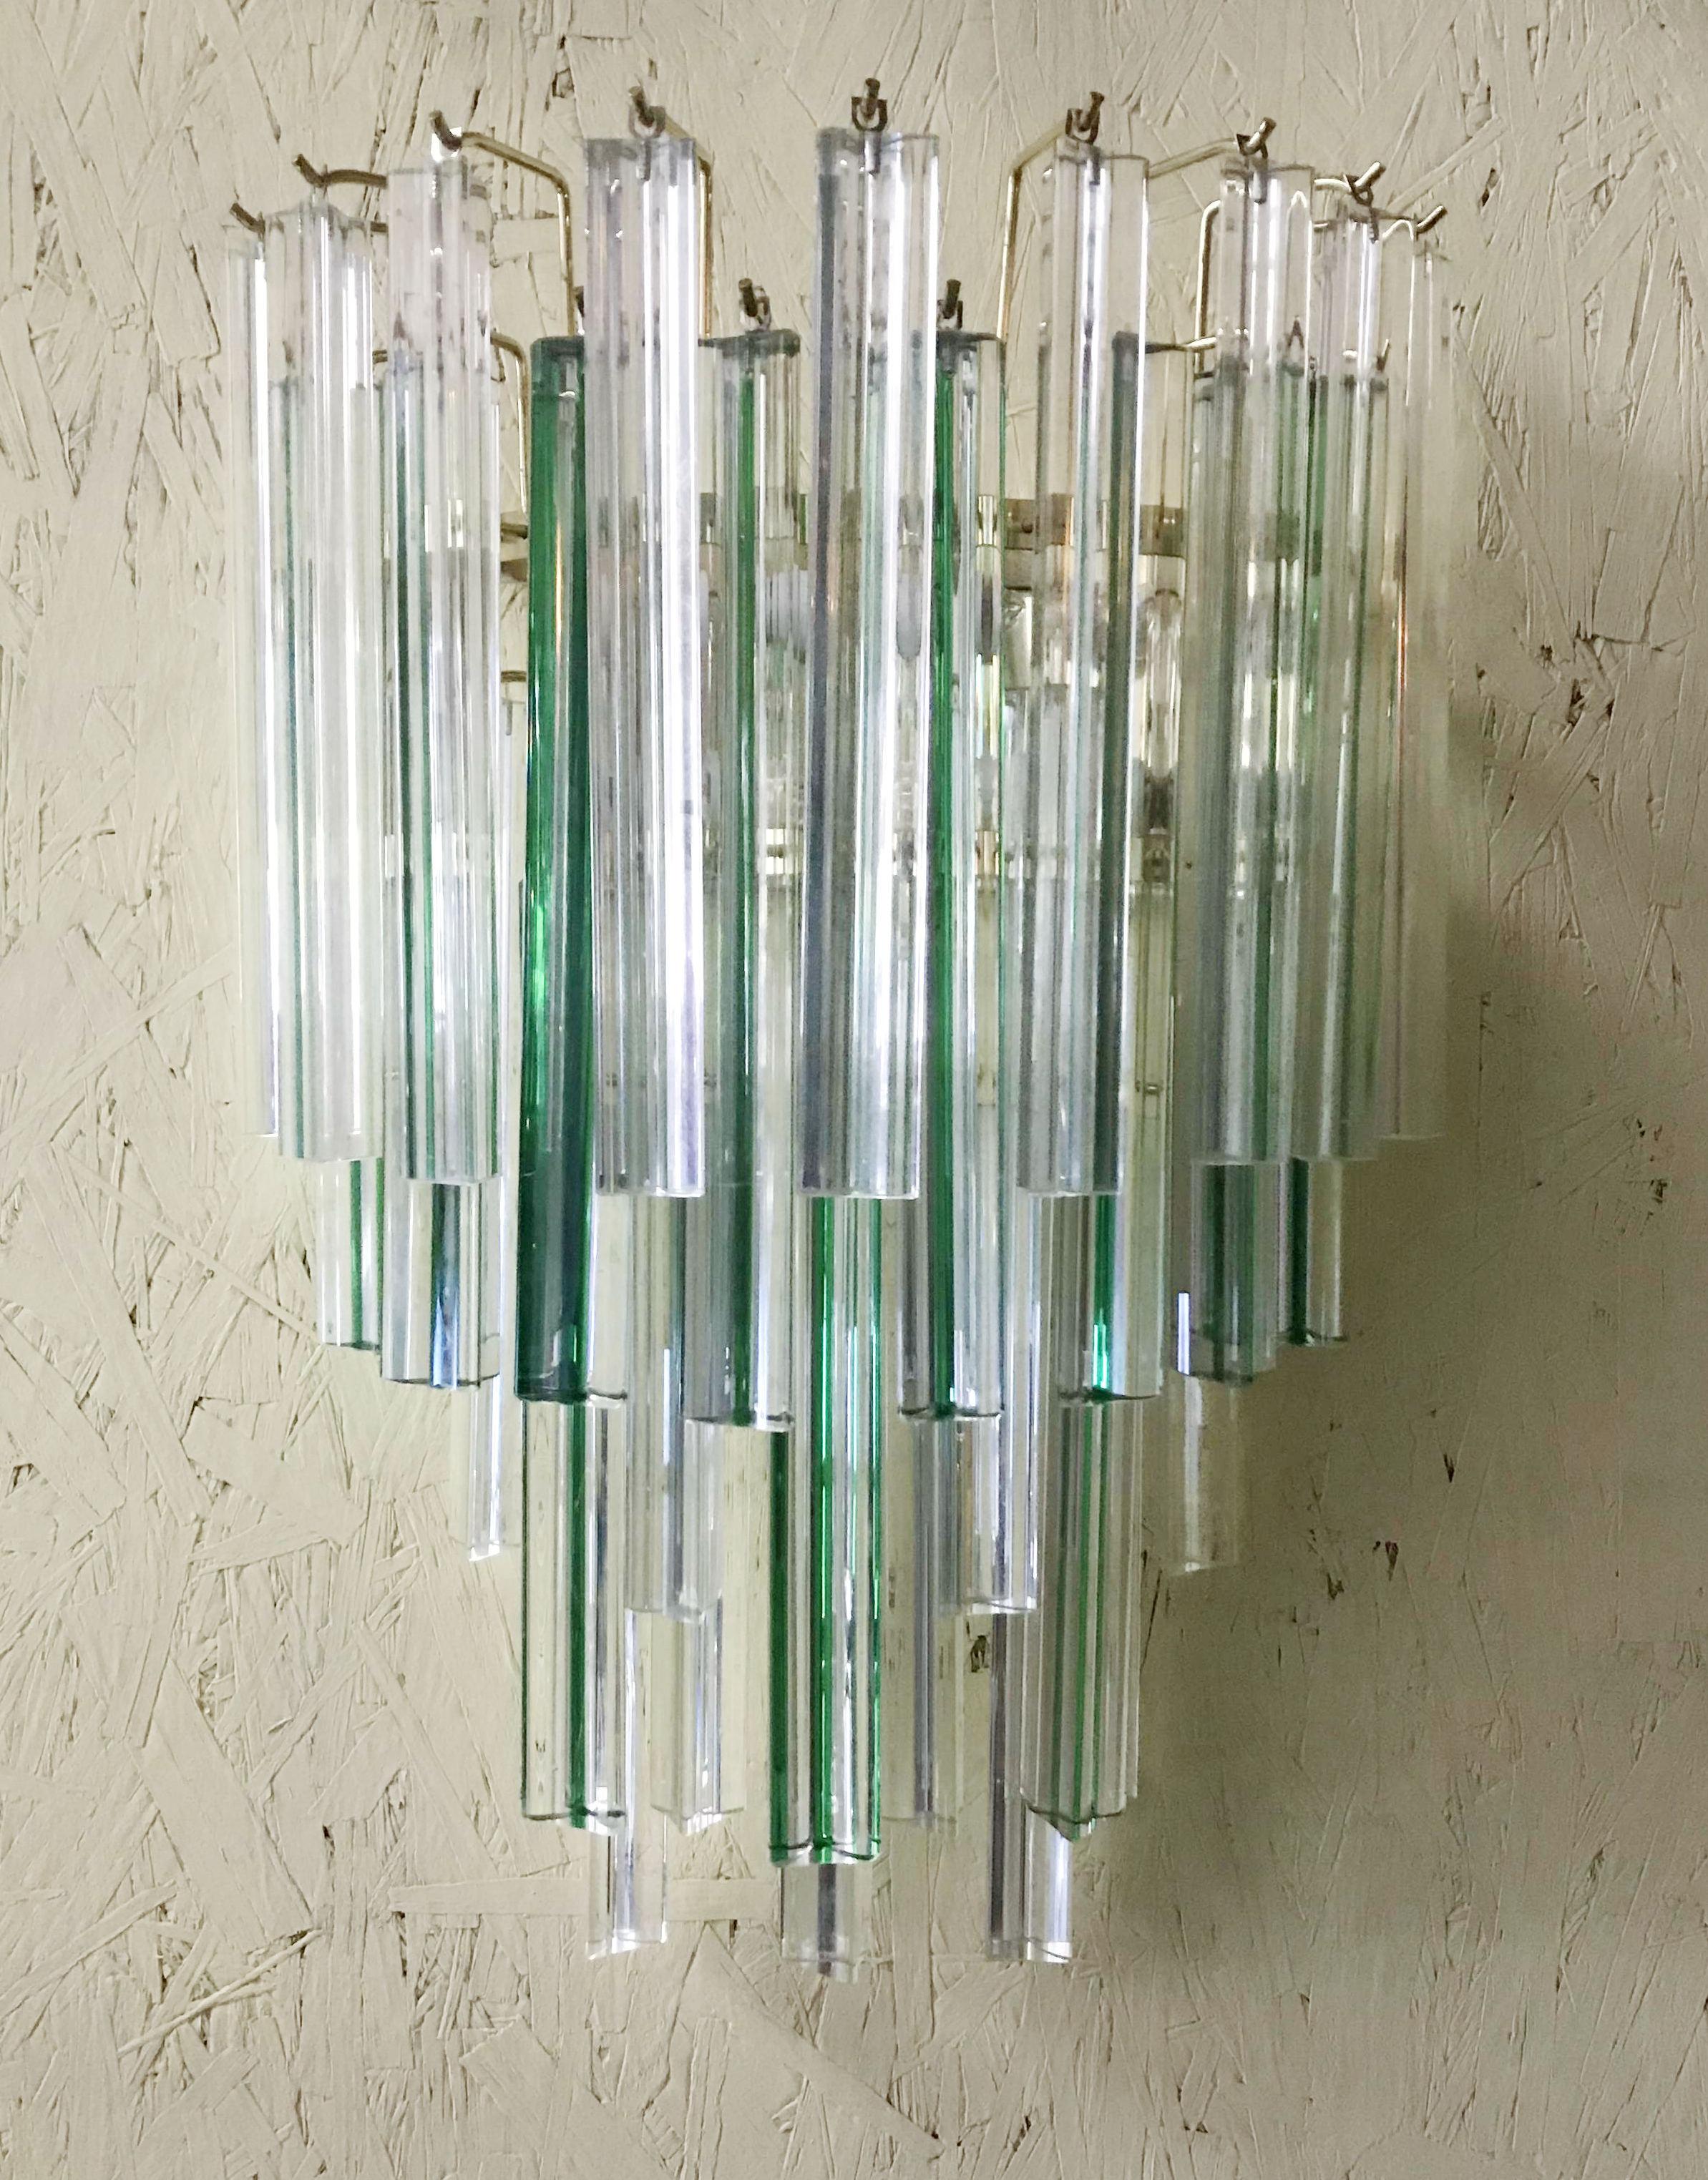 Vintage Italian wall lights with hand blown clear and green Murano glass crystals cut into three points in Triedri technique, mounted on brass back plates / designed by Venini, circa 1970s, made in Italy
2 lights / E12 or E14 type / max 40W